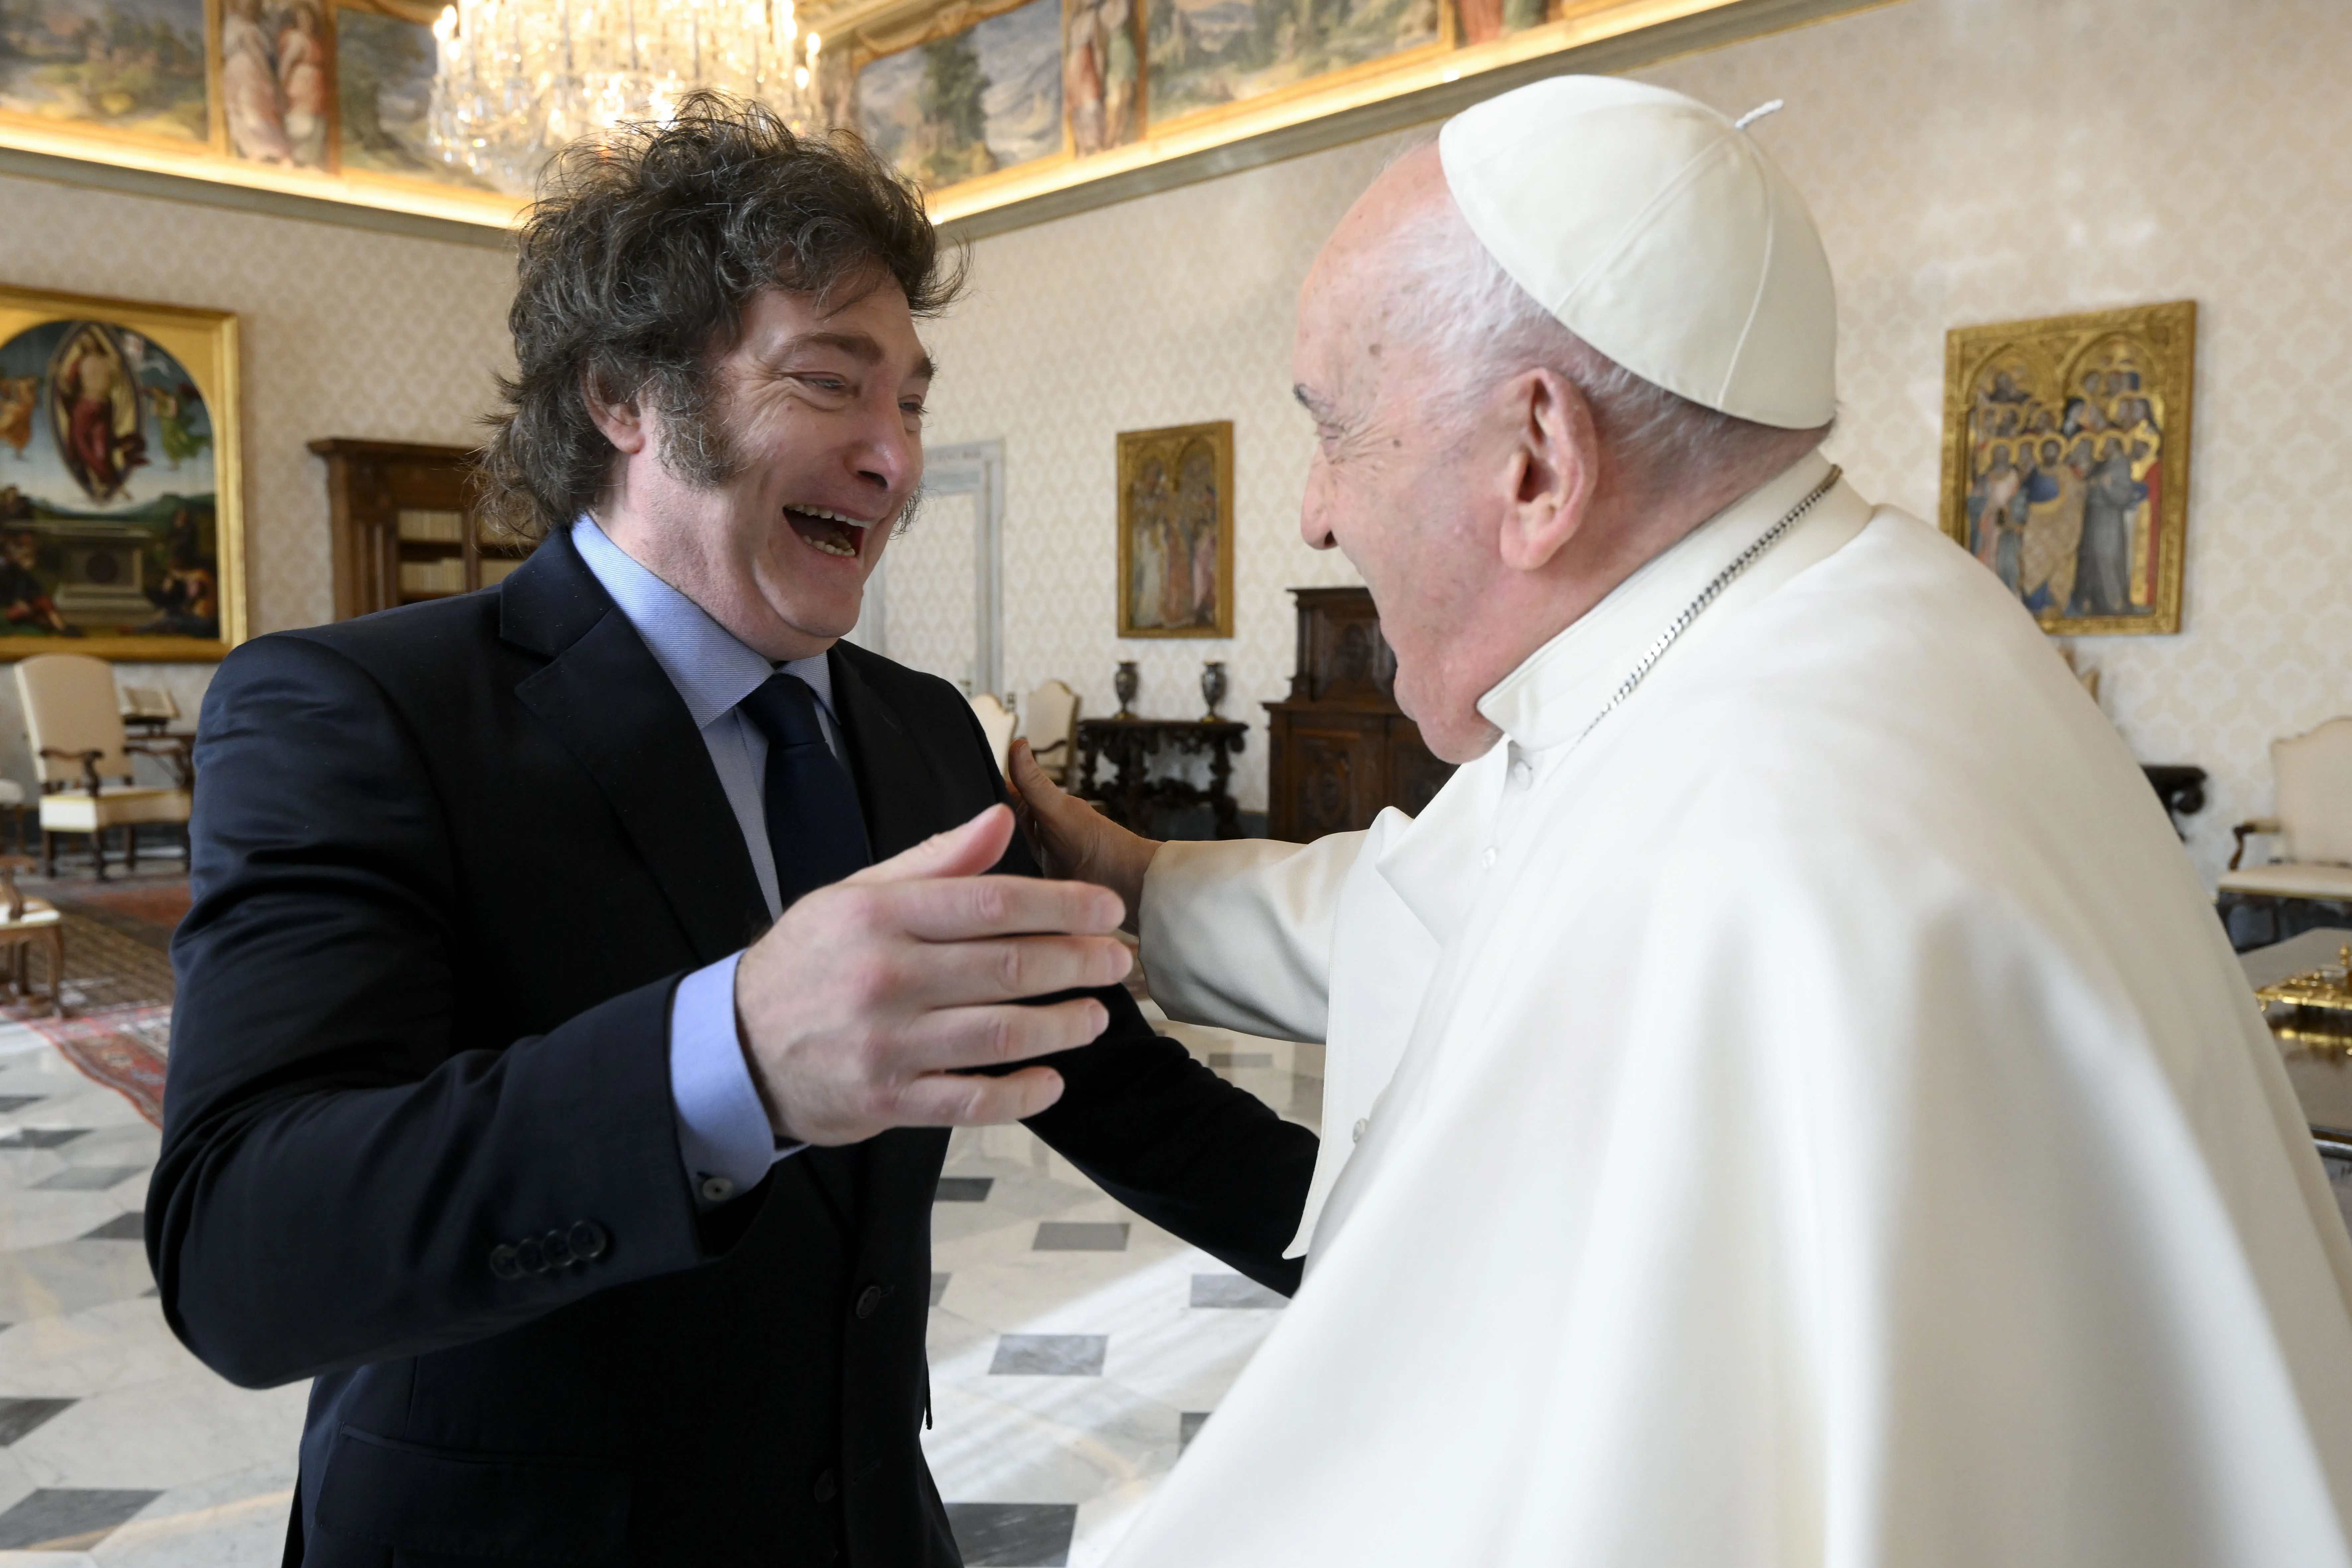 Meeting between Pope Francis and Argentine president signals possible turn in relationship